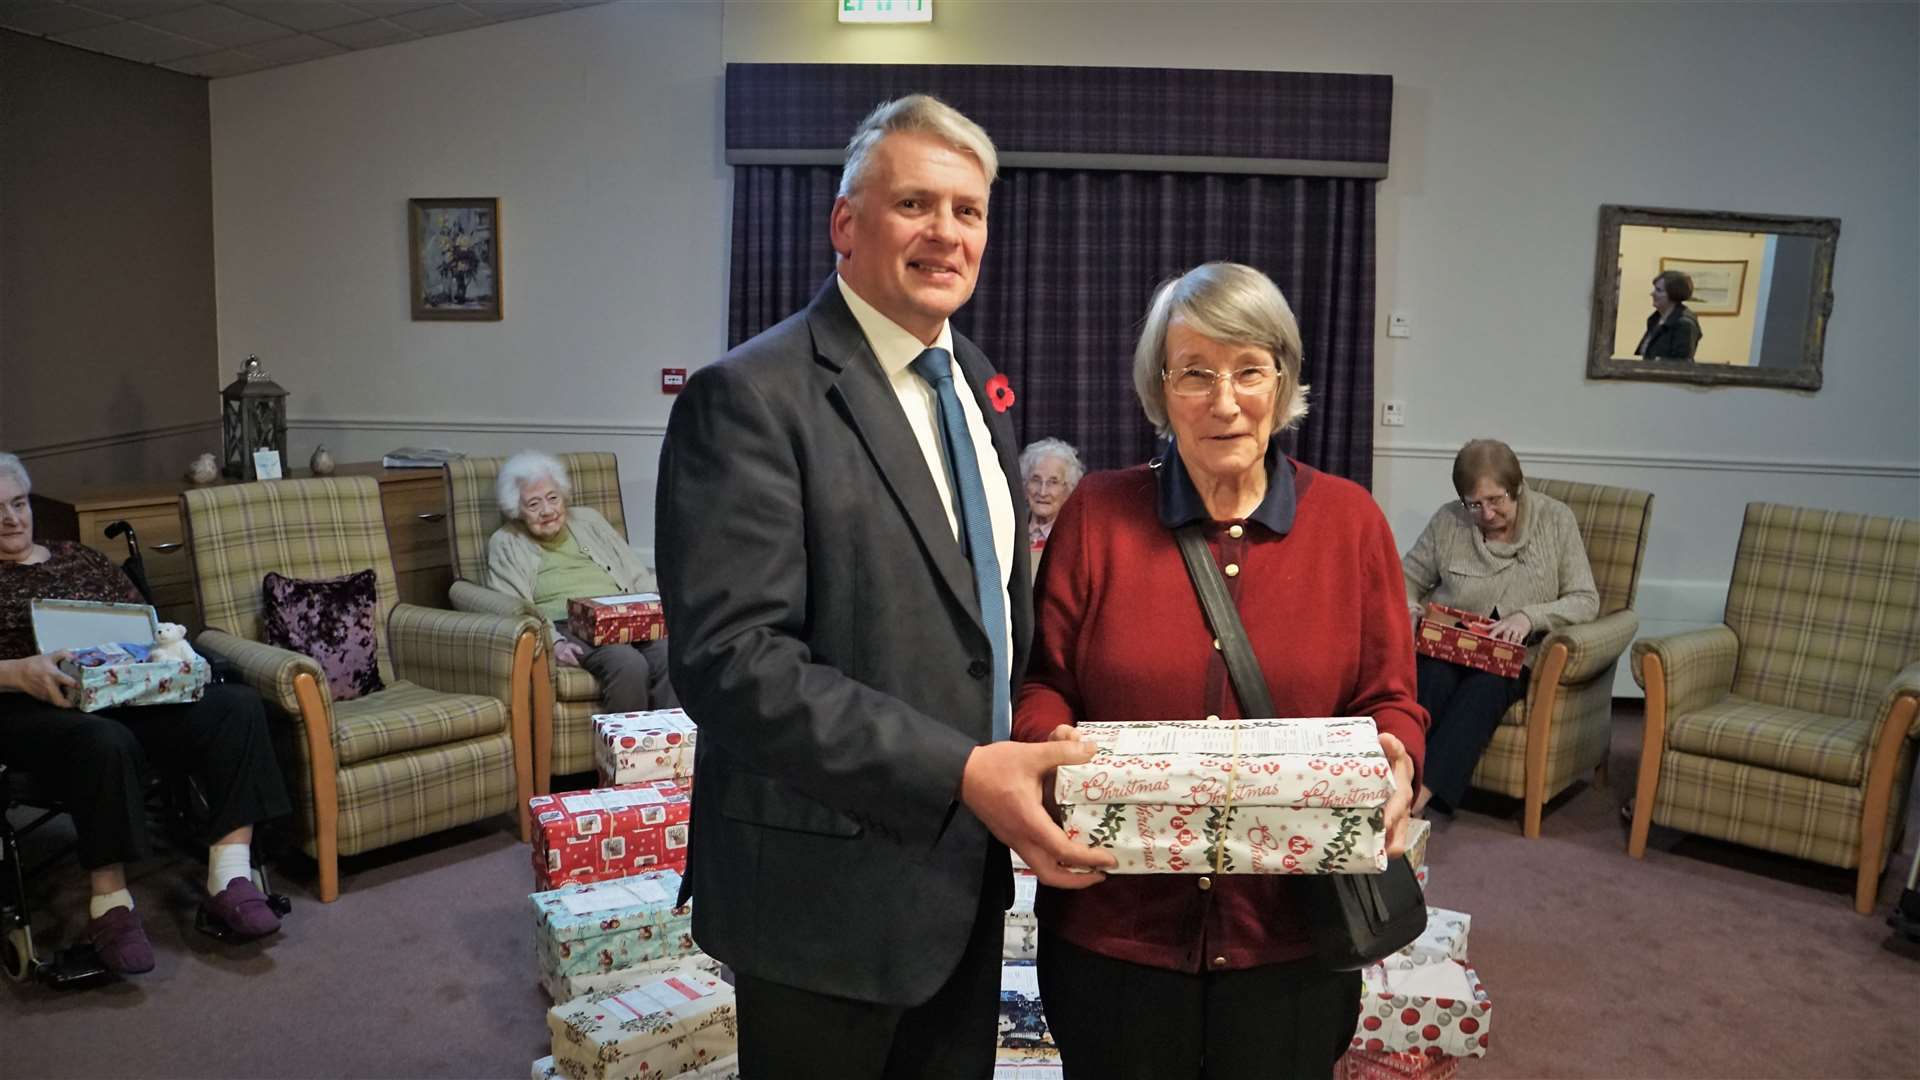 The Rev David Malcolm with Isobel Ferrier of Pentland View care home. Isobel was one of the many residents who helped fill the charity boxes.